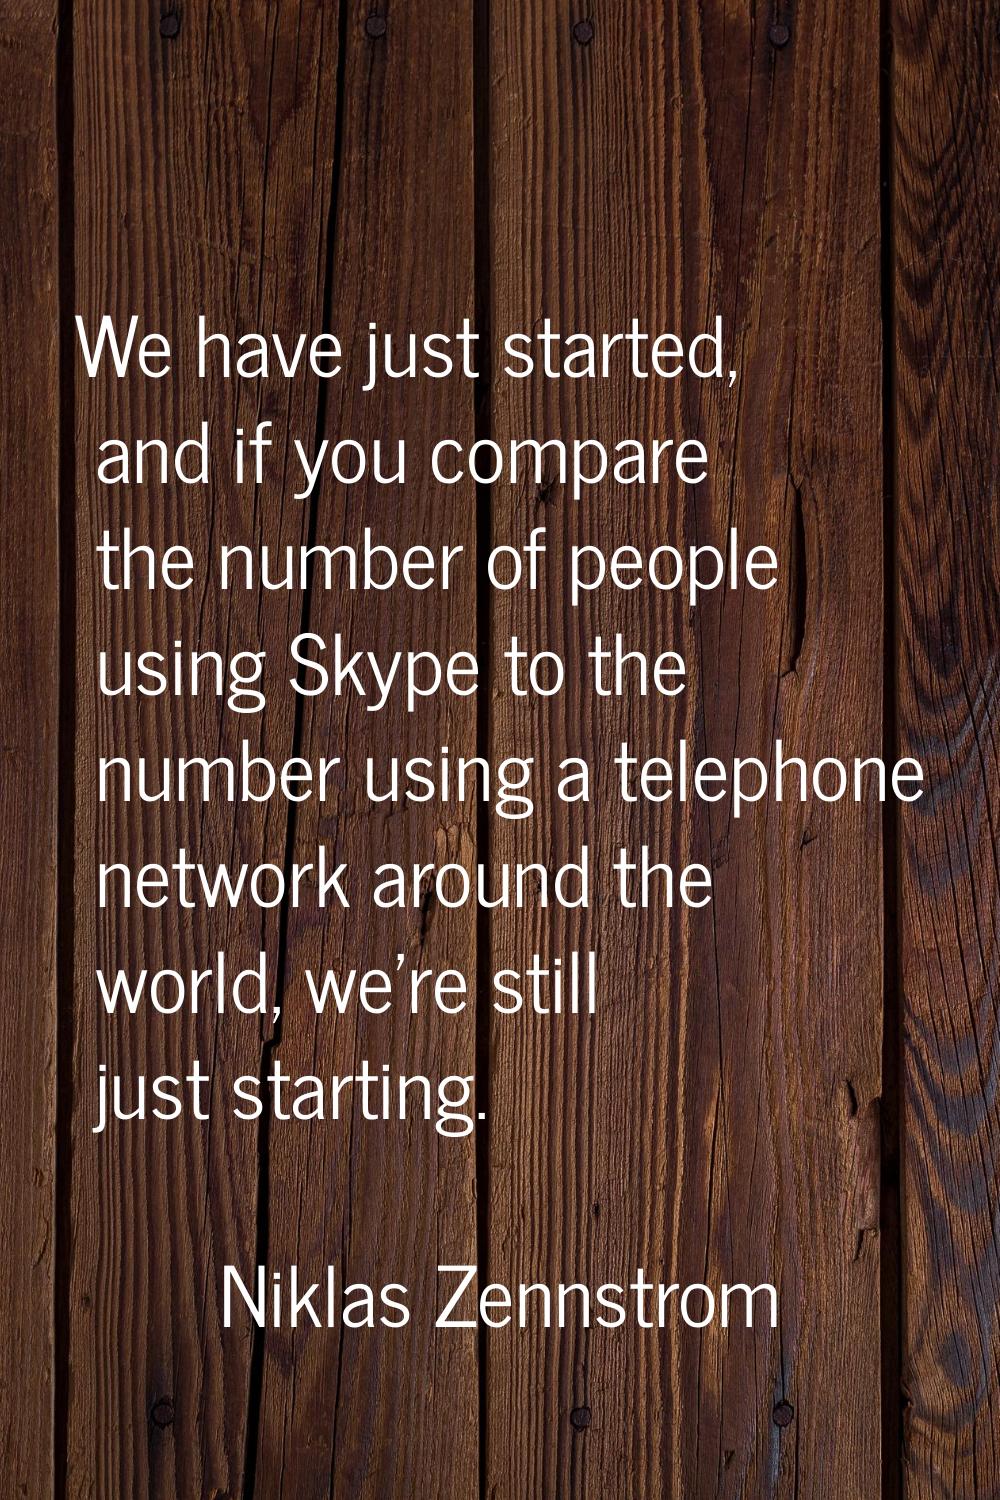 We have just started, and if you compare the number of people using Skype to the number using a tel